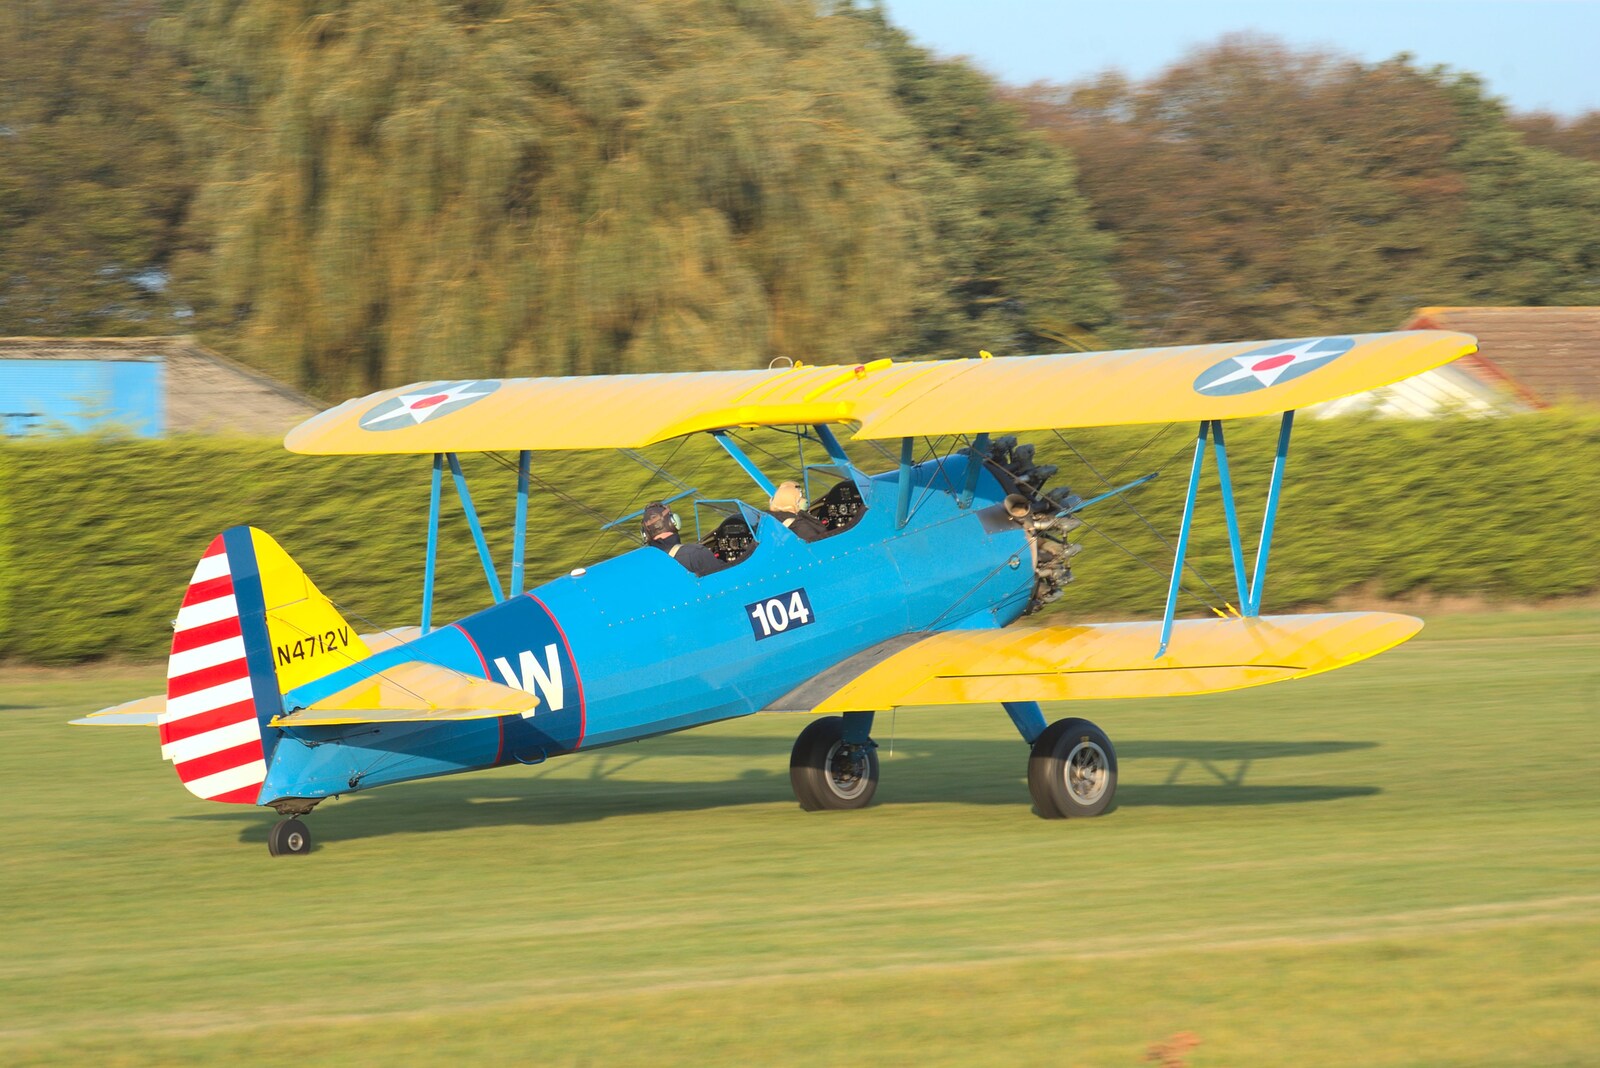 The Stearman trundles down the runway from Another Afternoon with Janie and Marinell the Mustangs, Hardwick, Norfolk - 16th October 2011